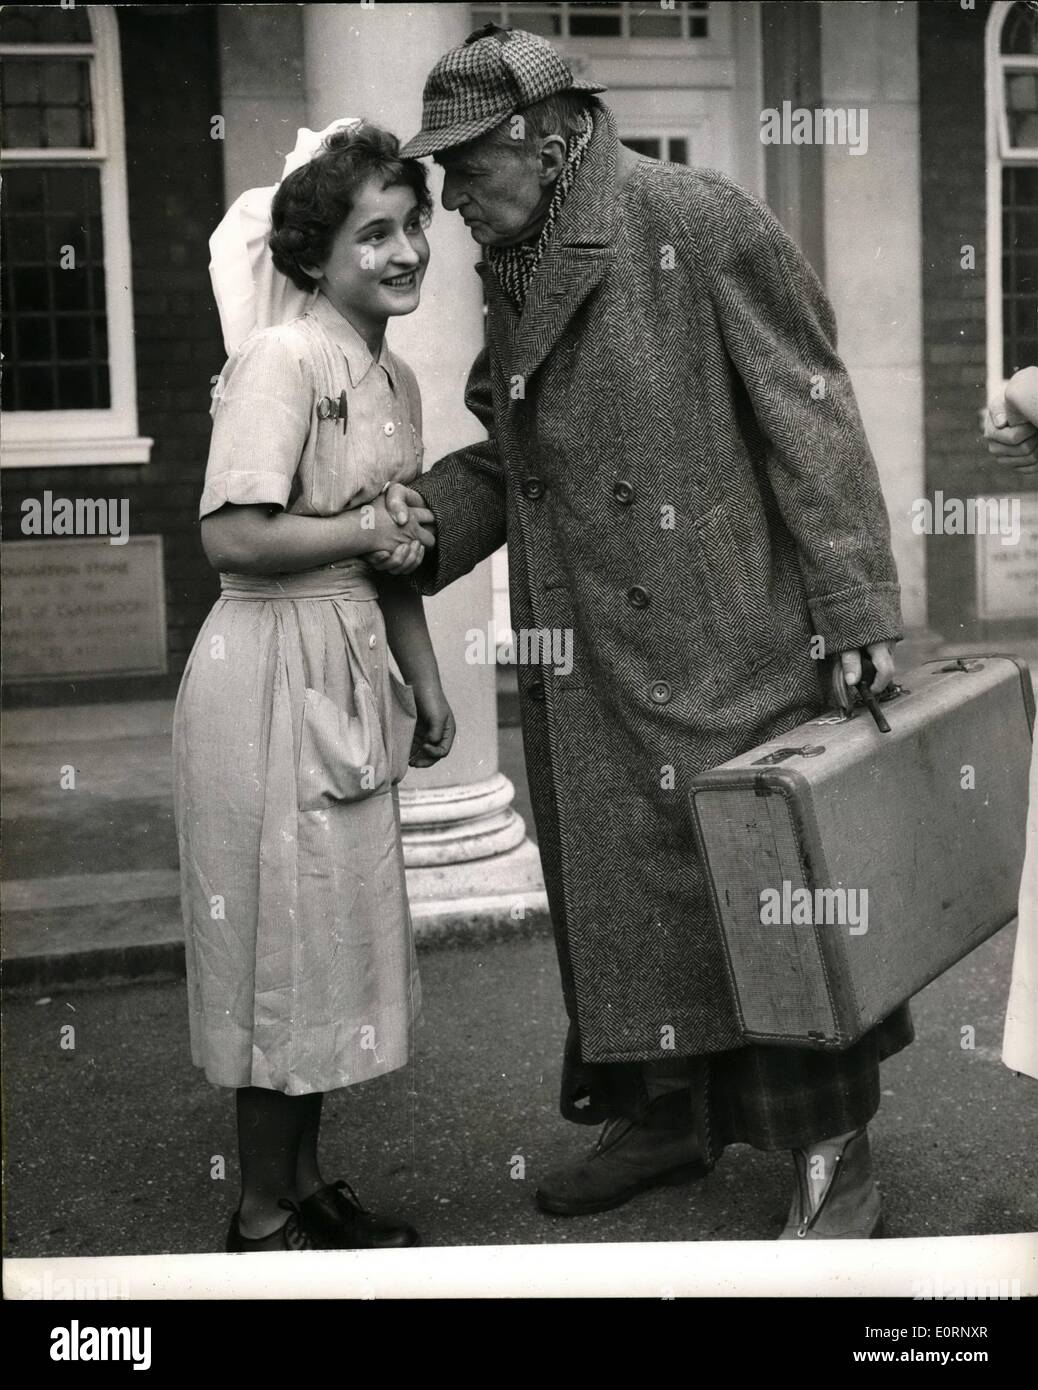 Feb. 02, 1960 - Matty Leaves Hospital: The 90-year old actor, A.E. Mathews left the Peace Memorial Hospital at Watford yesterday, where the spent four days recovering from a stroke. When he left he was wearing a deerstalker overcoat, dressing gown and show boots. Photo Shows A nurse says goodbye to A.E.Mathews, when he left the hospital yesterday. Stock Photo